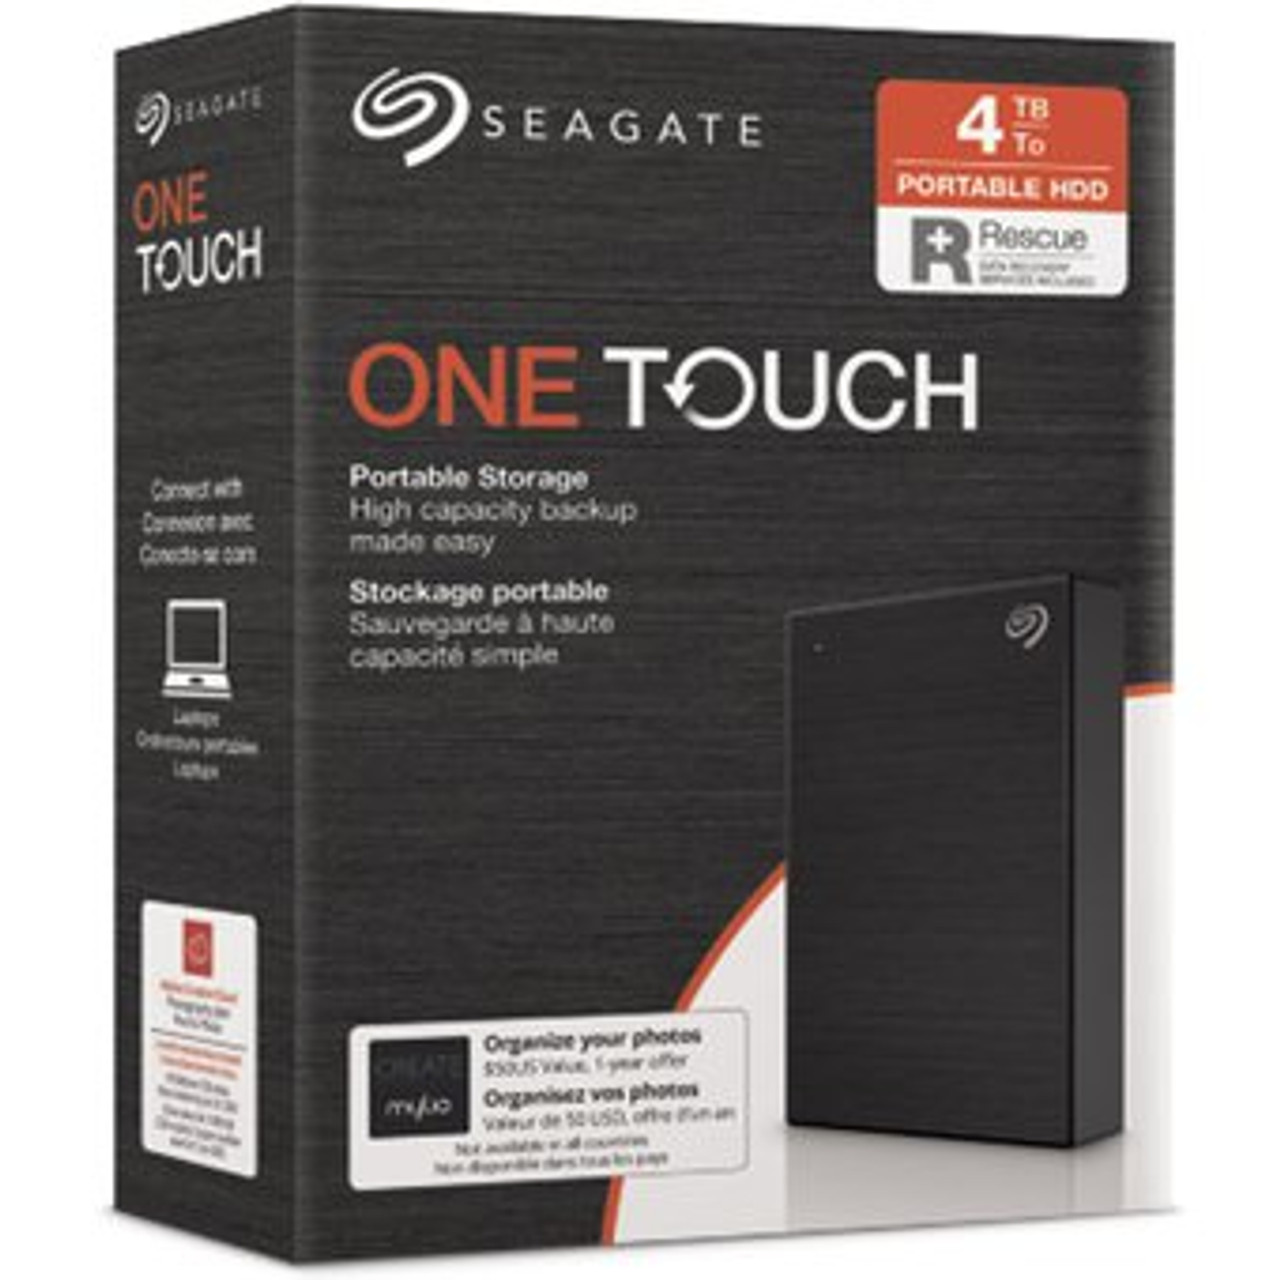 Seagate 4TB One Touch Desktop External Hard Disk, Black, AYOUB COMPUTERS